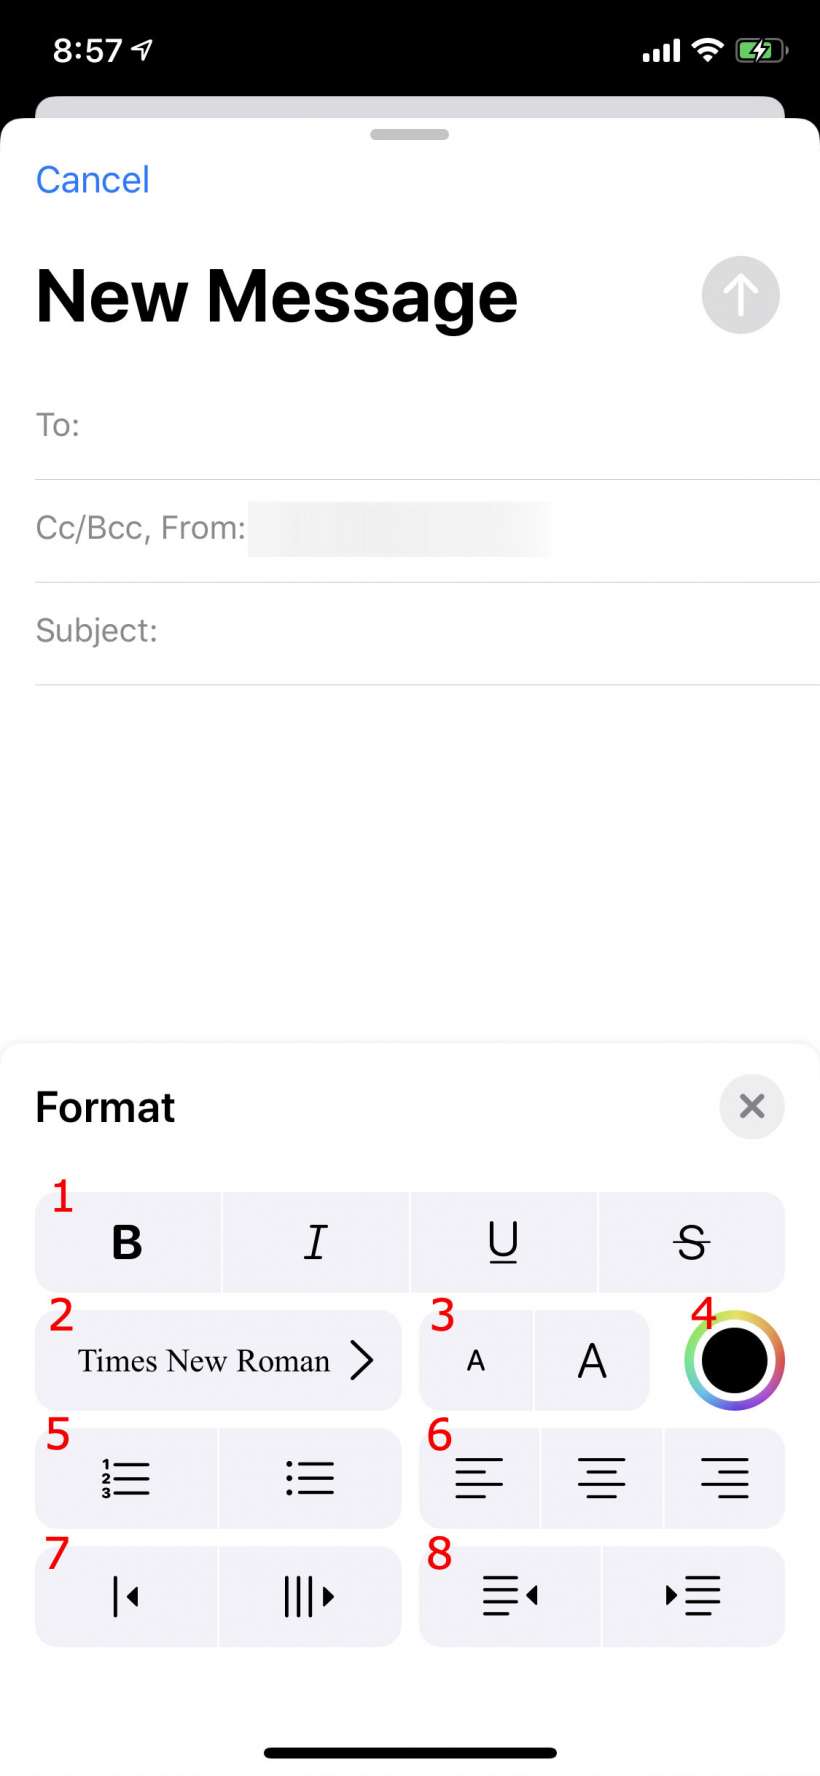 How to use bullet lists in email on iPhone and iPad.